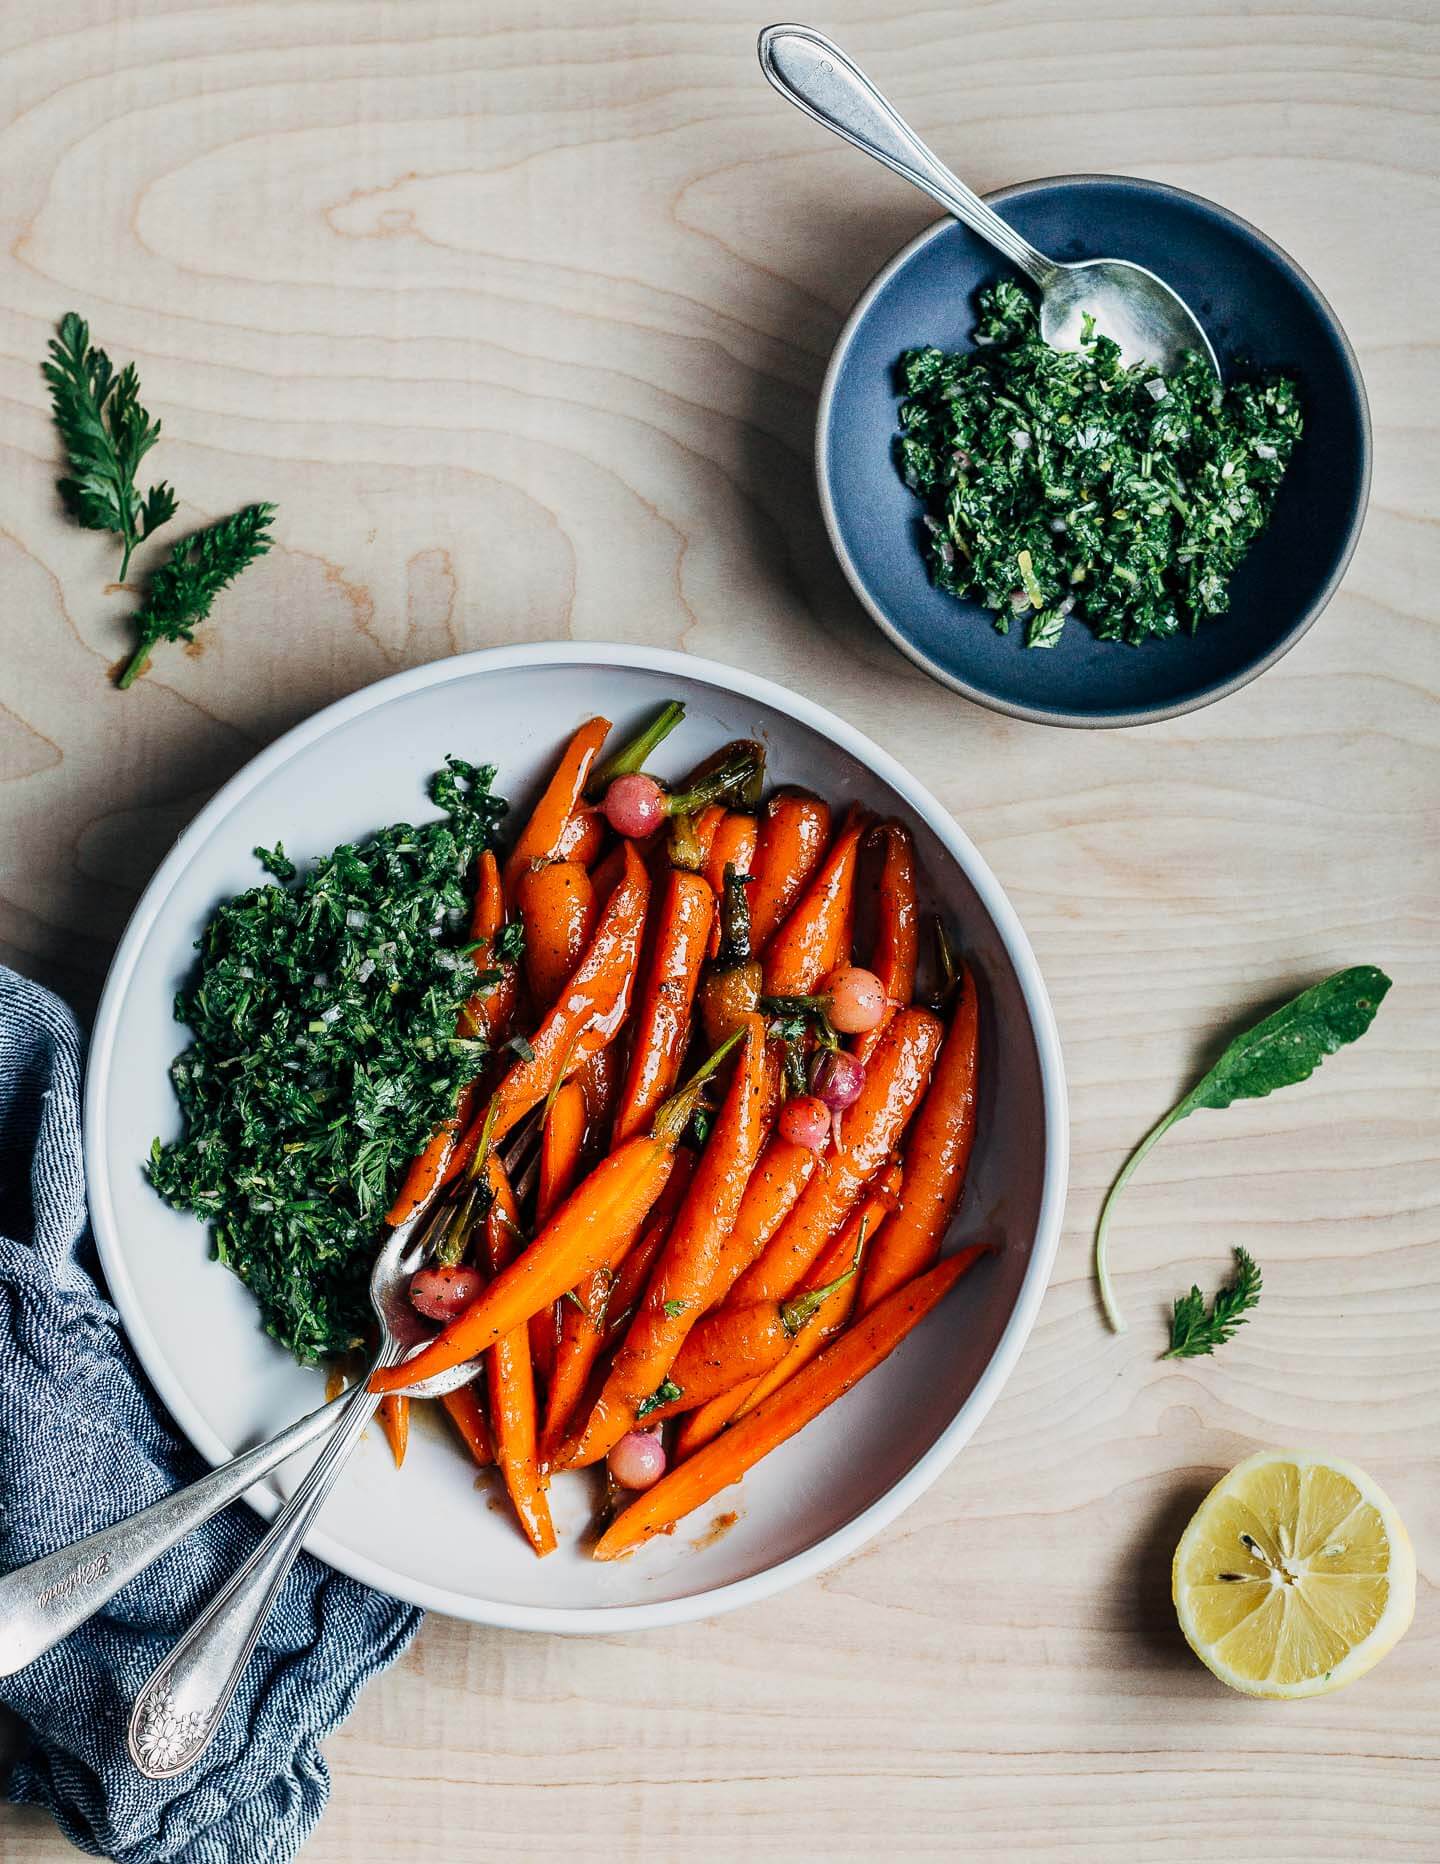 These springy glazed carrots are delightfully buttery and light with a vegetable broth-based glaze and are served alongside a bright carrot top chimichurri.